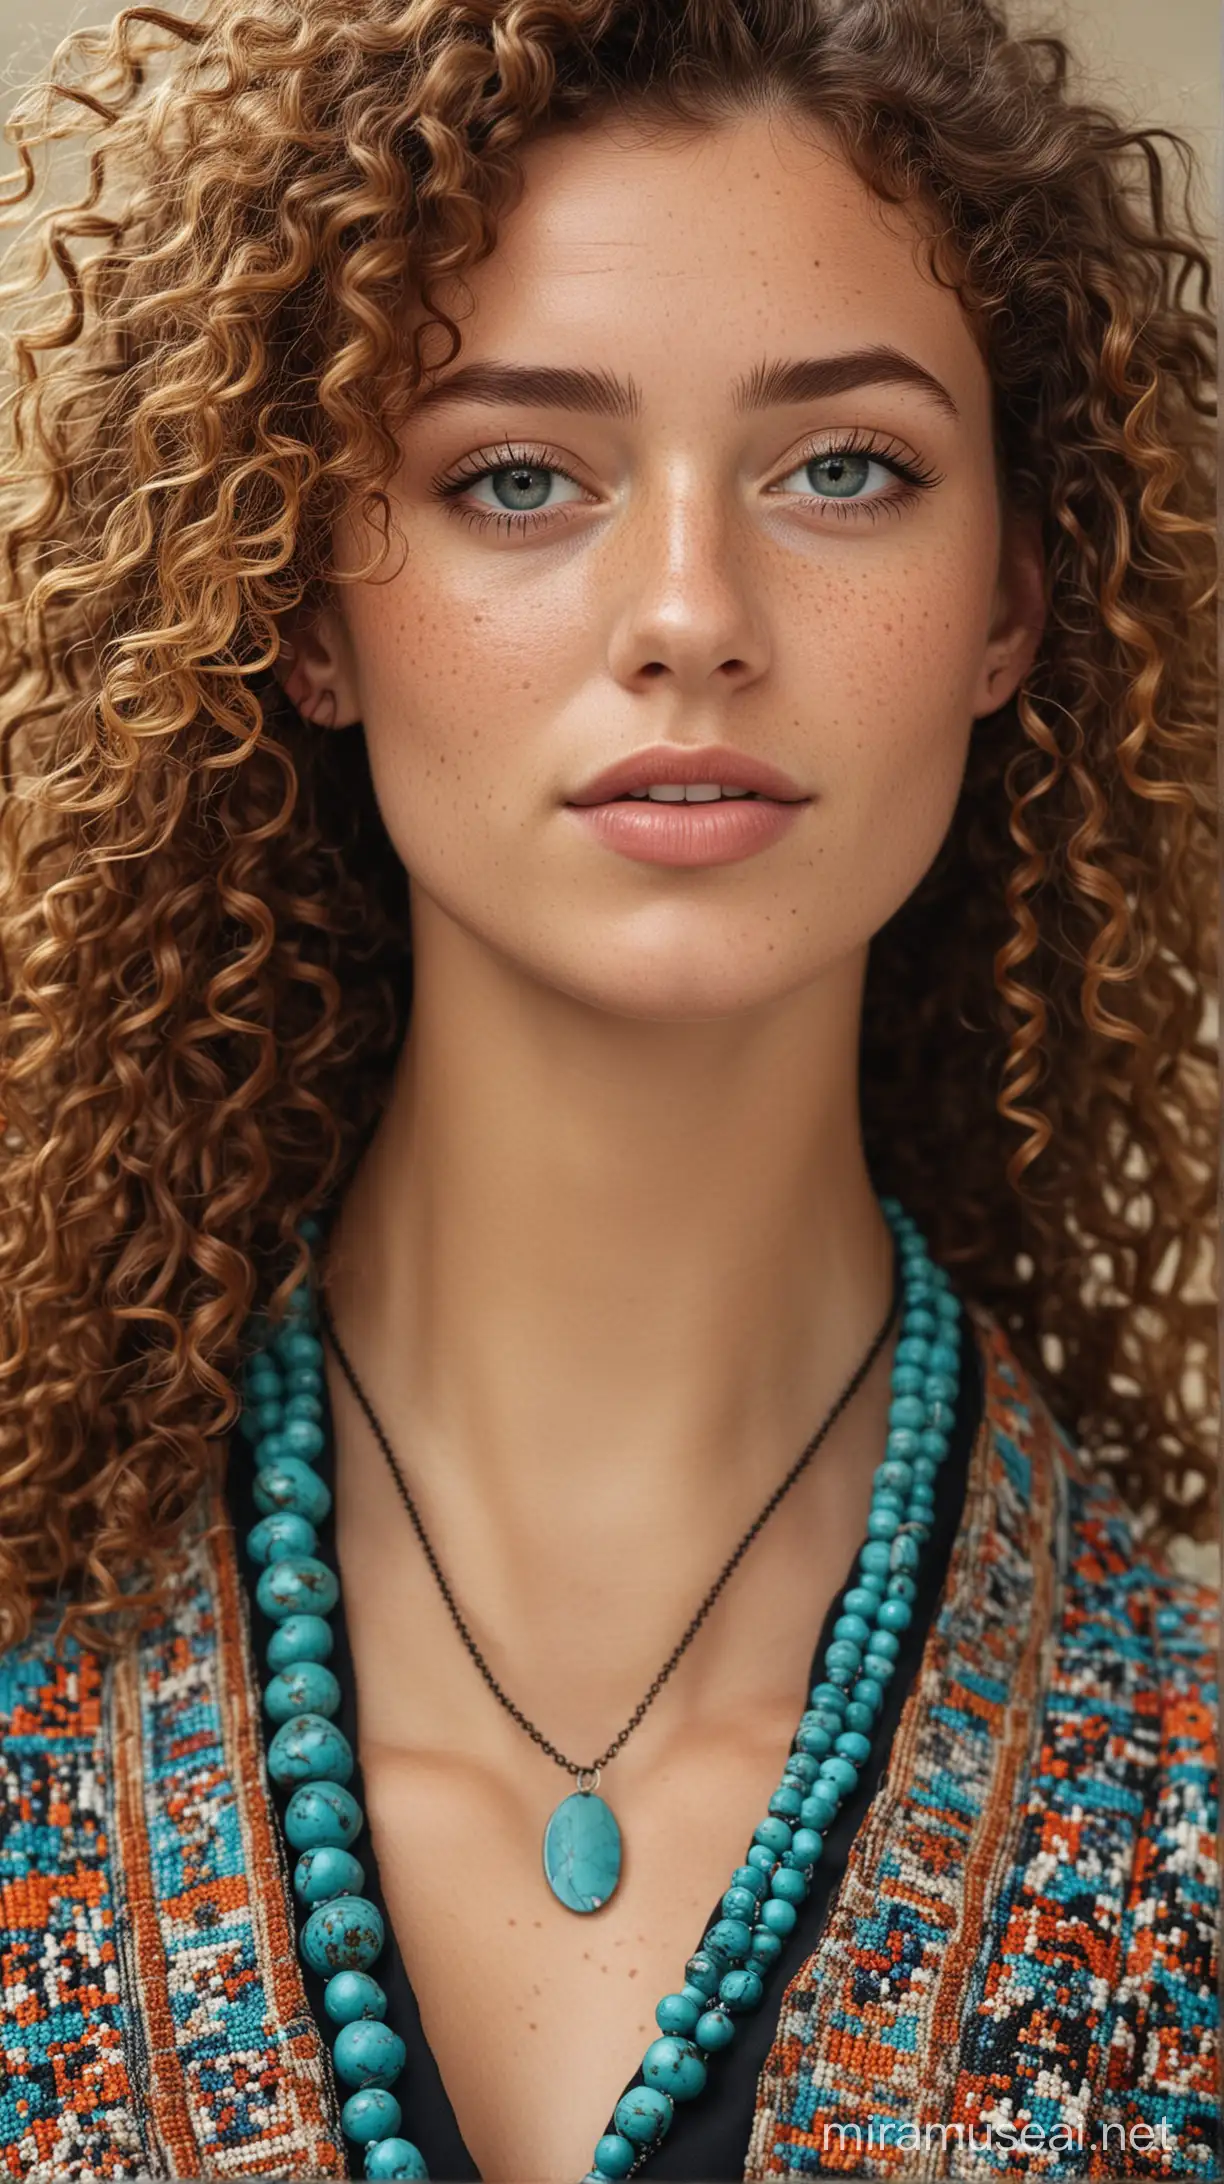 

"Let the model have curly hair, a freckled face, wearing a handicraft jacket, a black skirt, and a necklace with large turquoise beads around her neck."